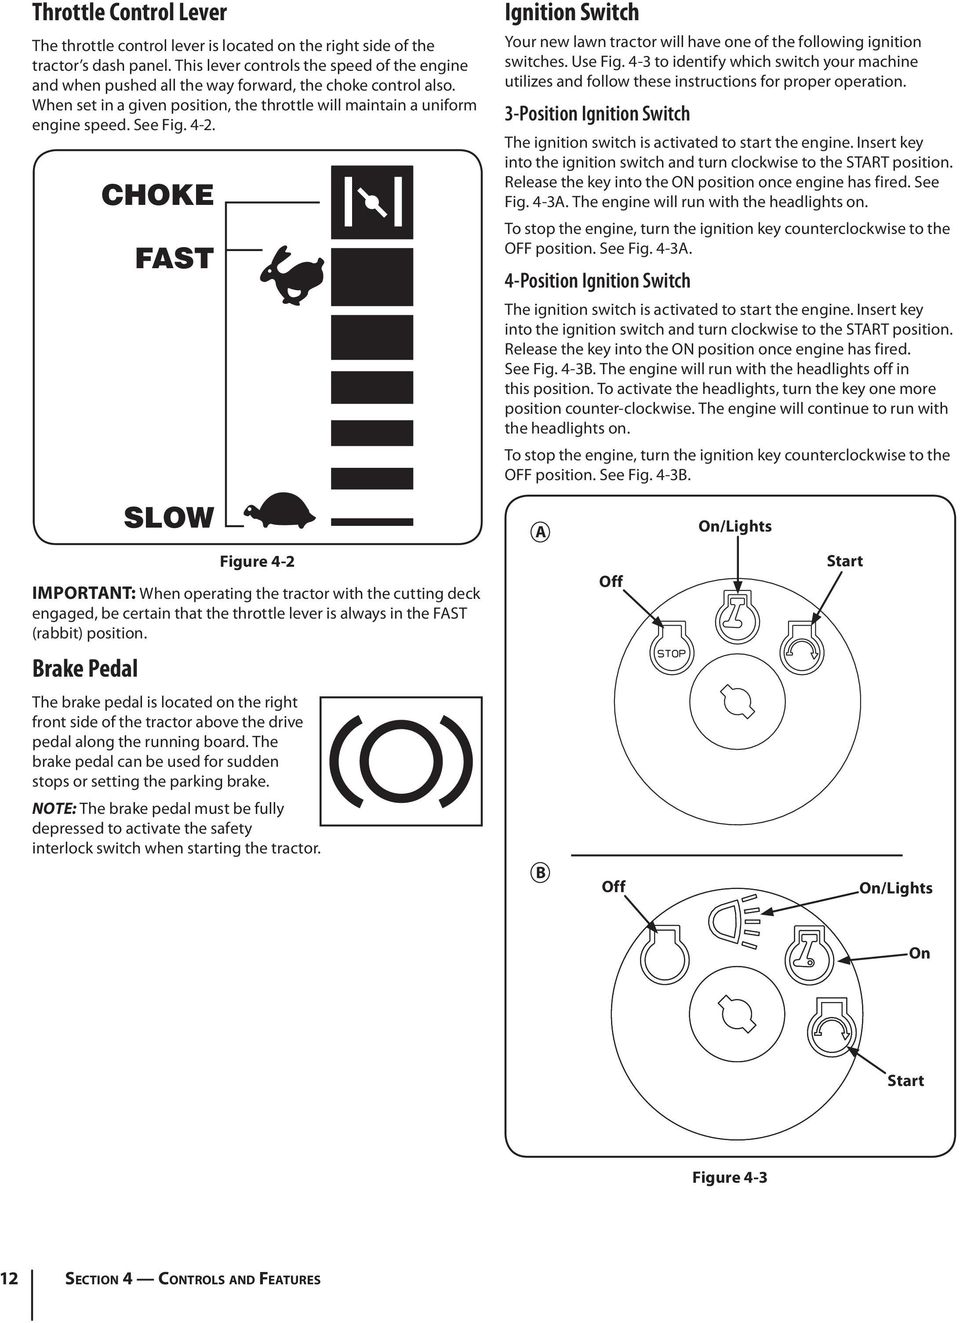 4- CHOKE FAST Ignition Switch Your new lawn tractor will have one of the following ignition switches. Use Fig.